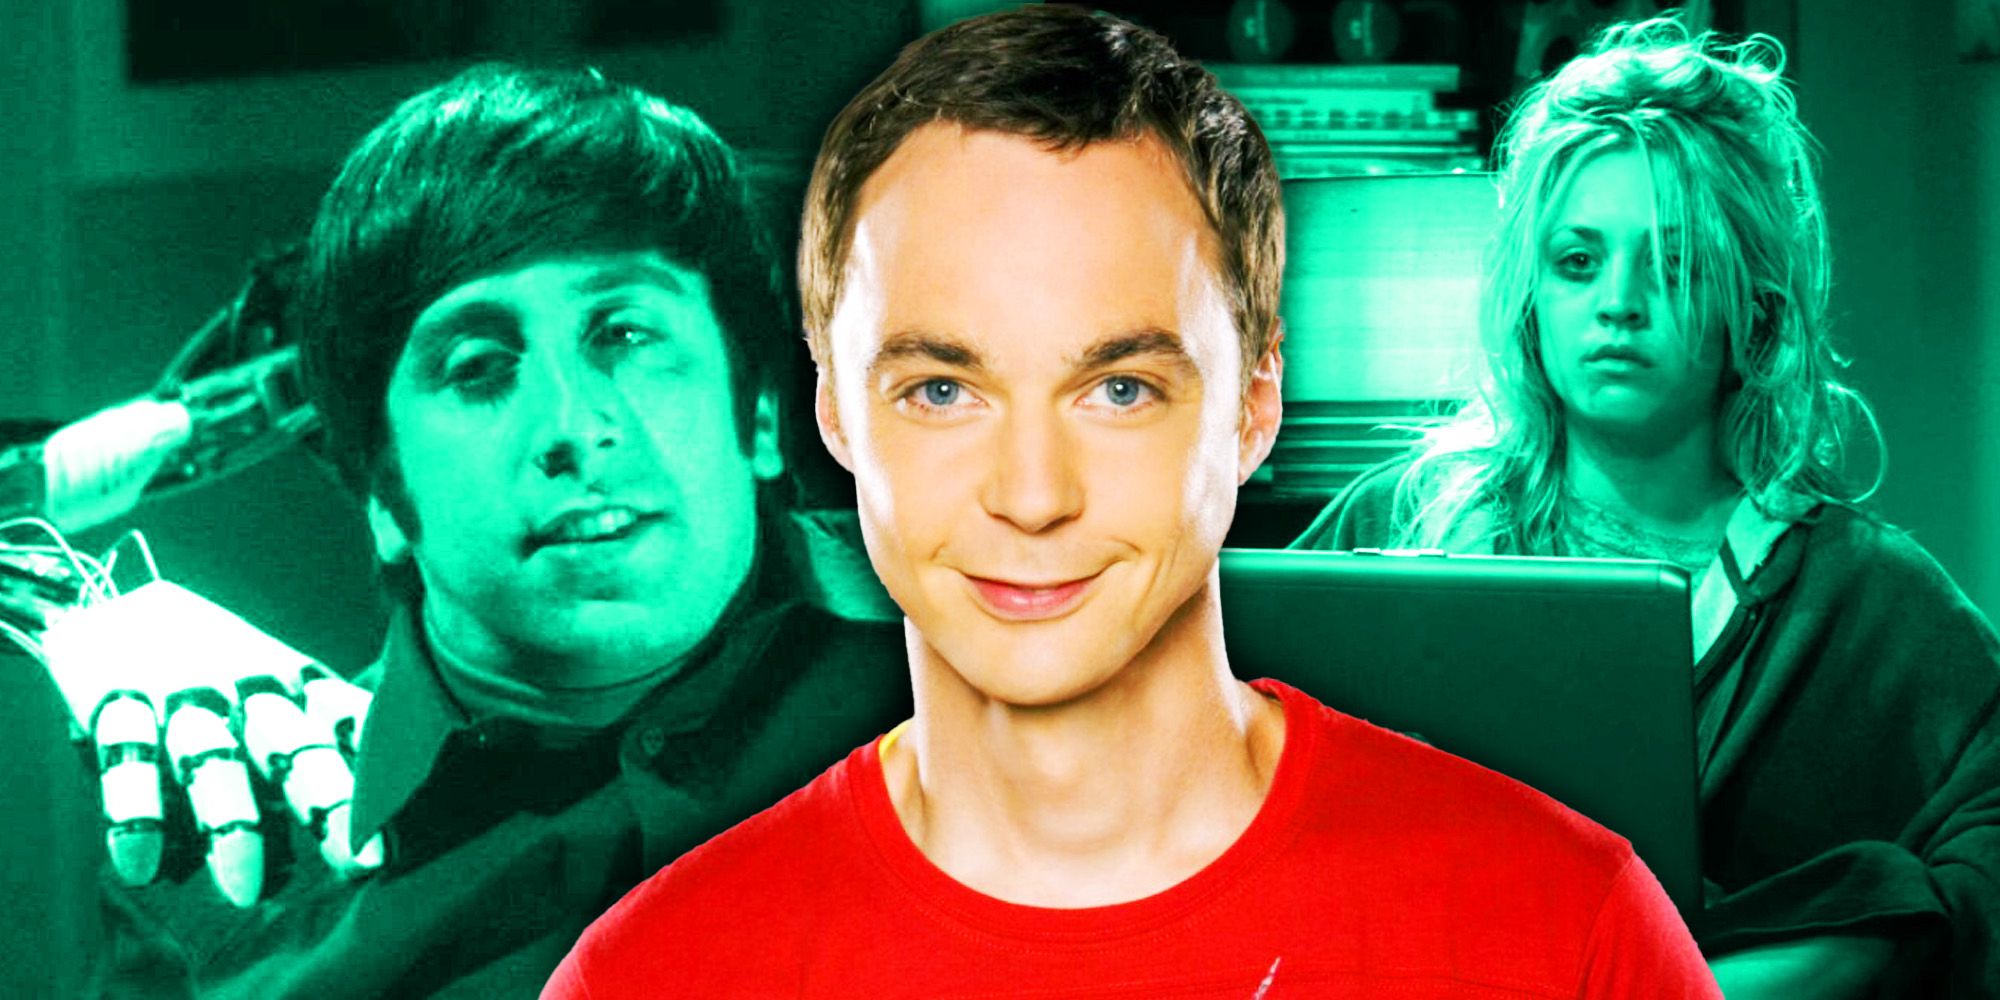 A collage featuring Howard, Sheldon, and Penny from The Big Bang Theory